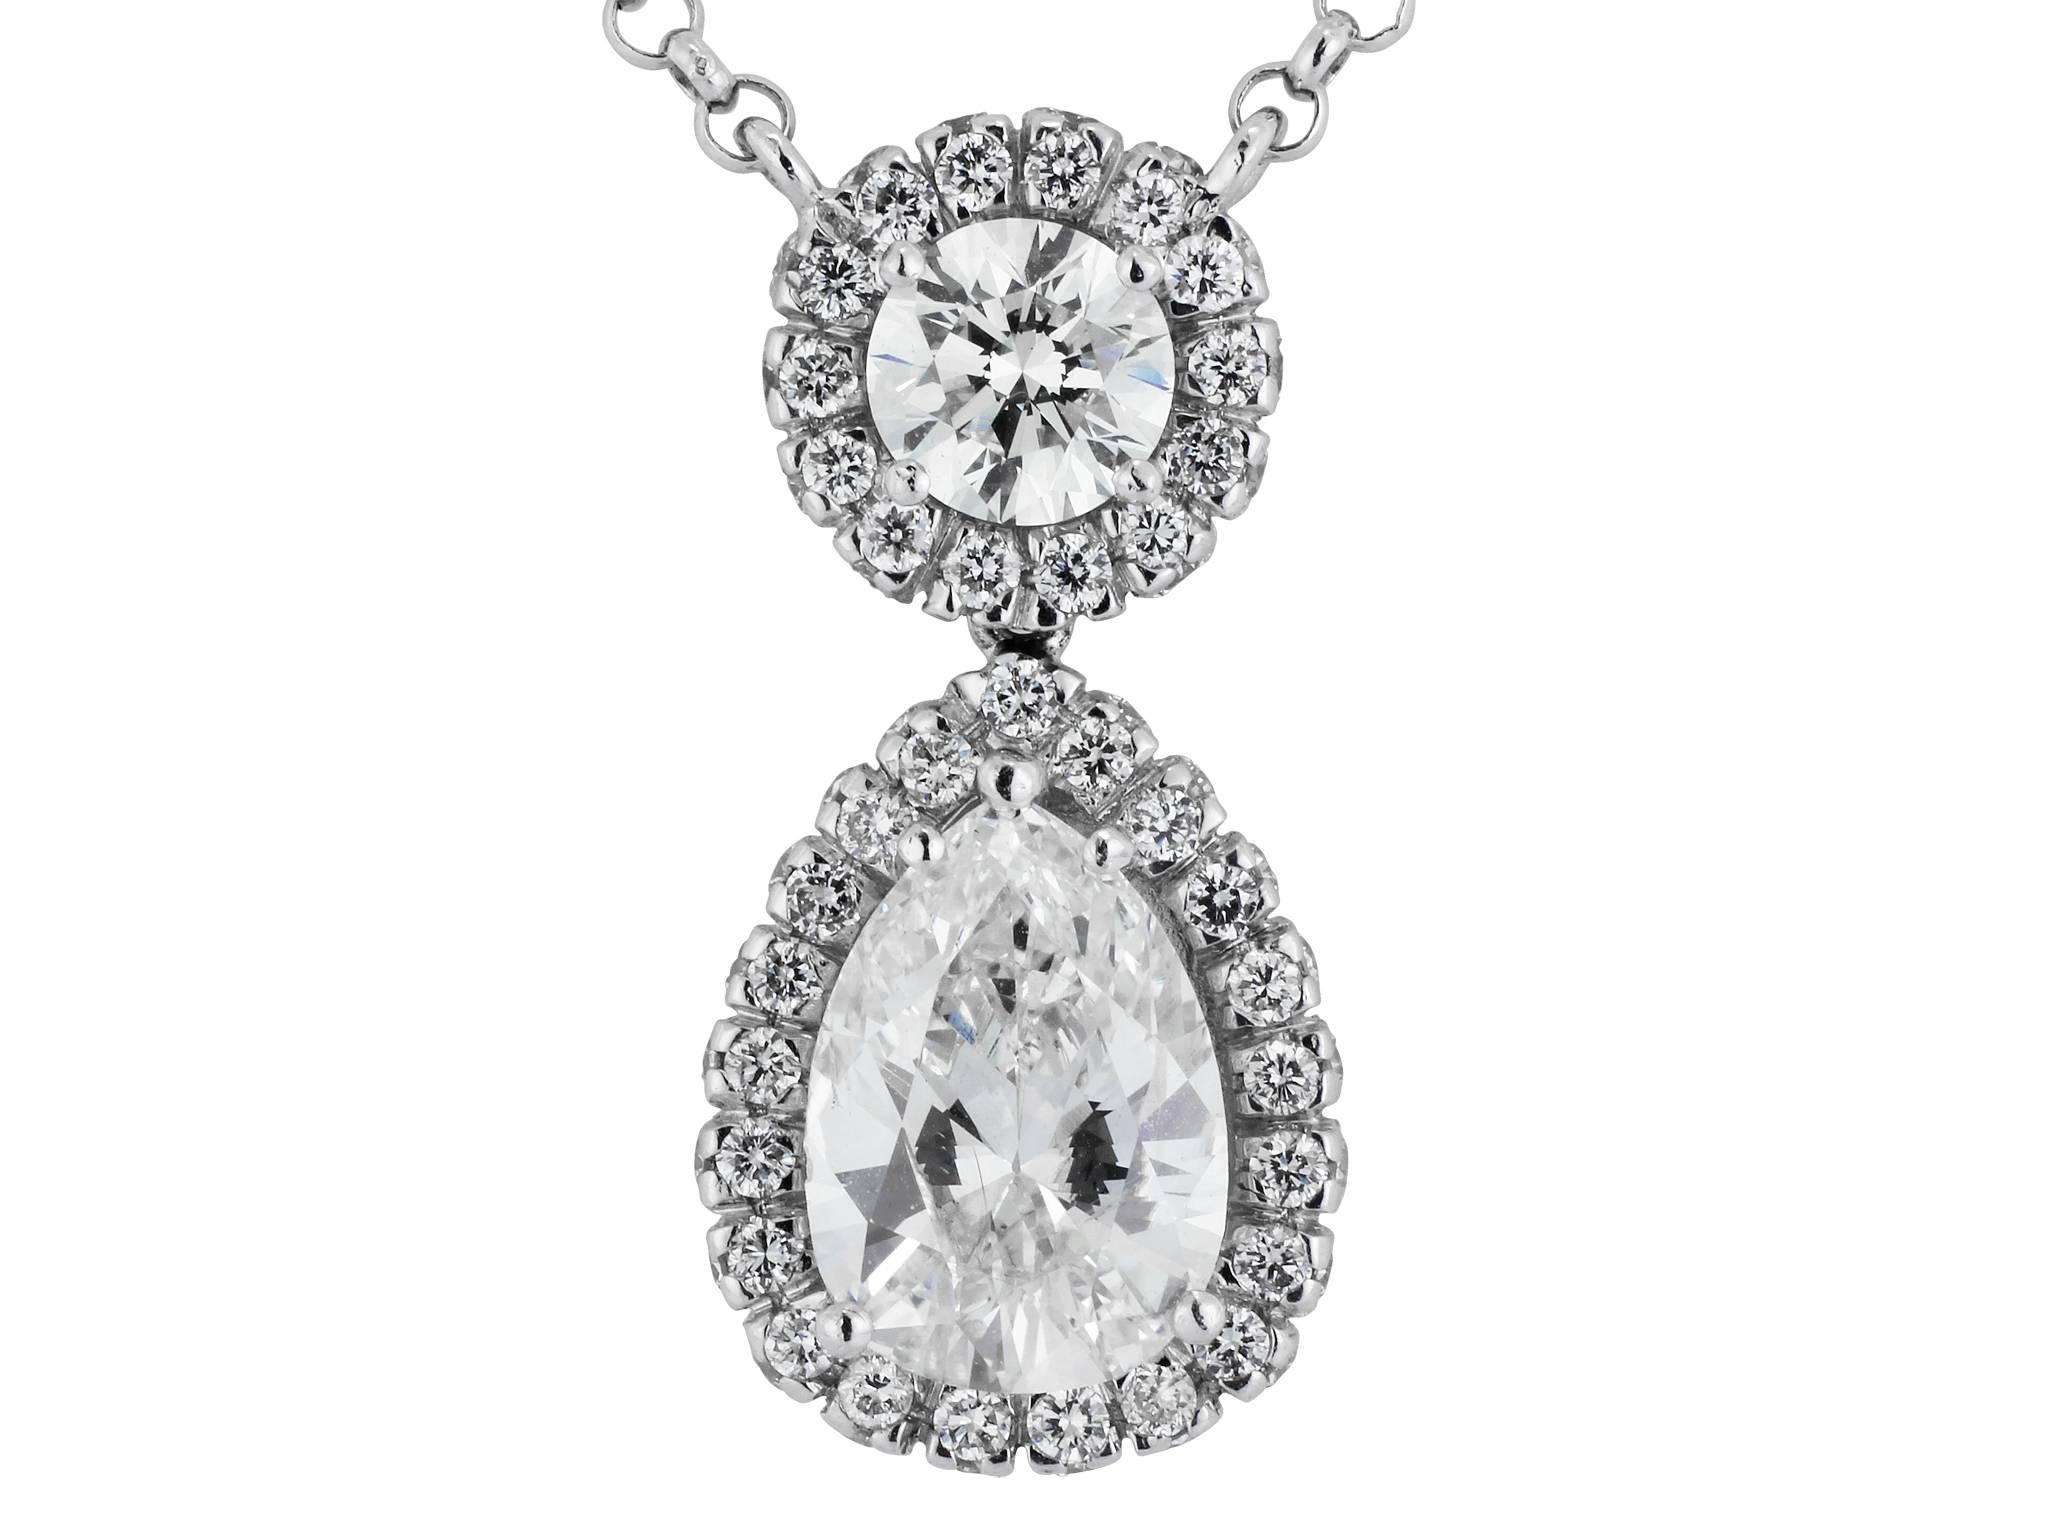 18 karat white gold necklace consisting of 1 pear shape diamond weighing 1.78 carats dropping from 1 full cut diamond weighing .51 carats, both stones are surrounded by 1 row of 91 full cut diamond weighing 1.20 carats, there are 14 rose cut